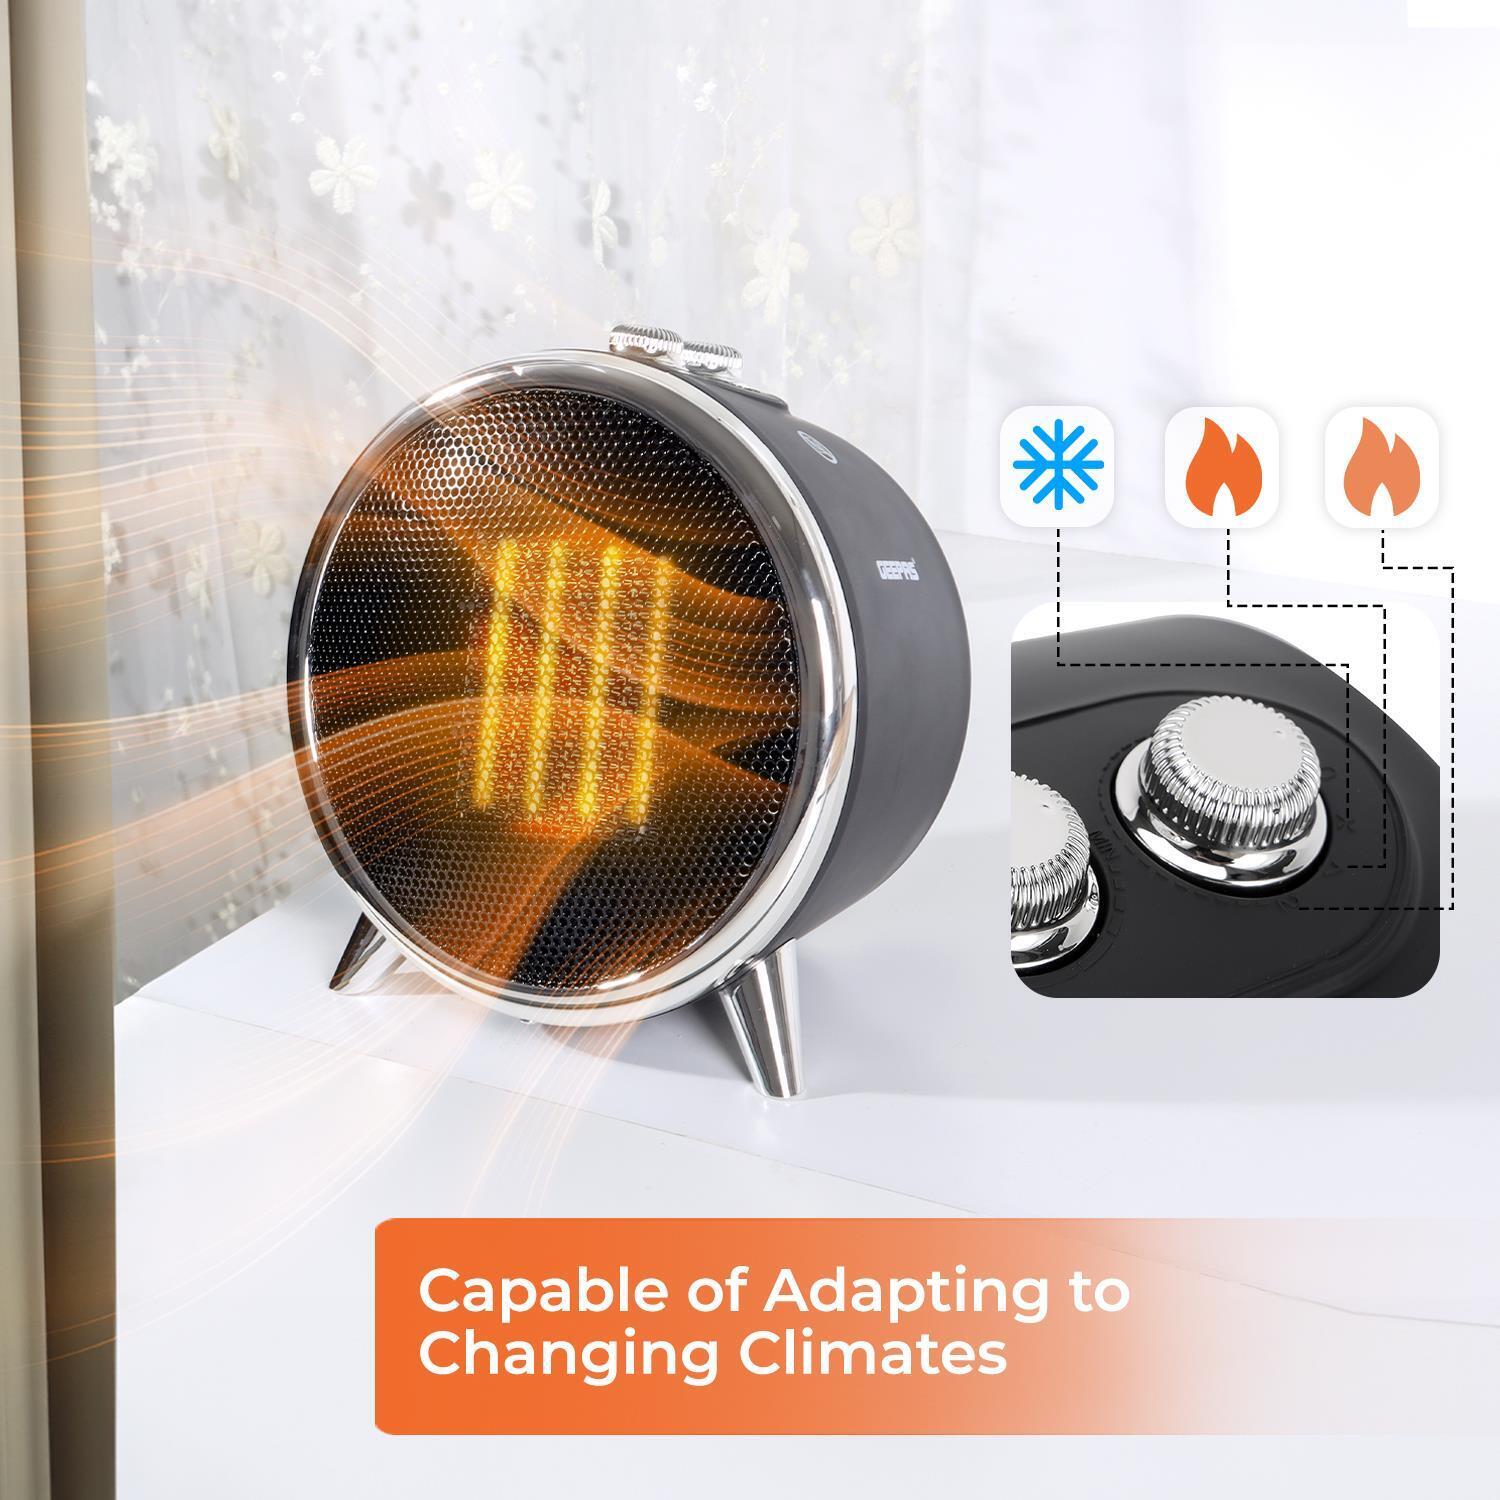 Thermostat-Controlled PTC Heater: 2 Heat Settings, 750-1500W